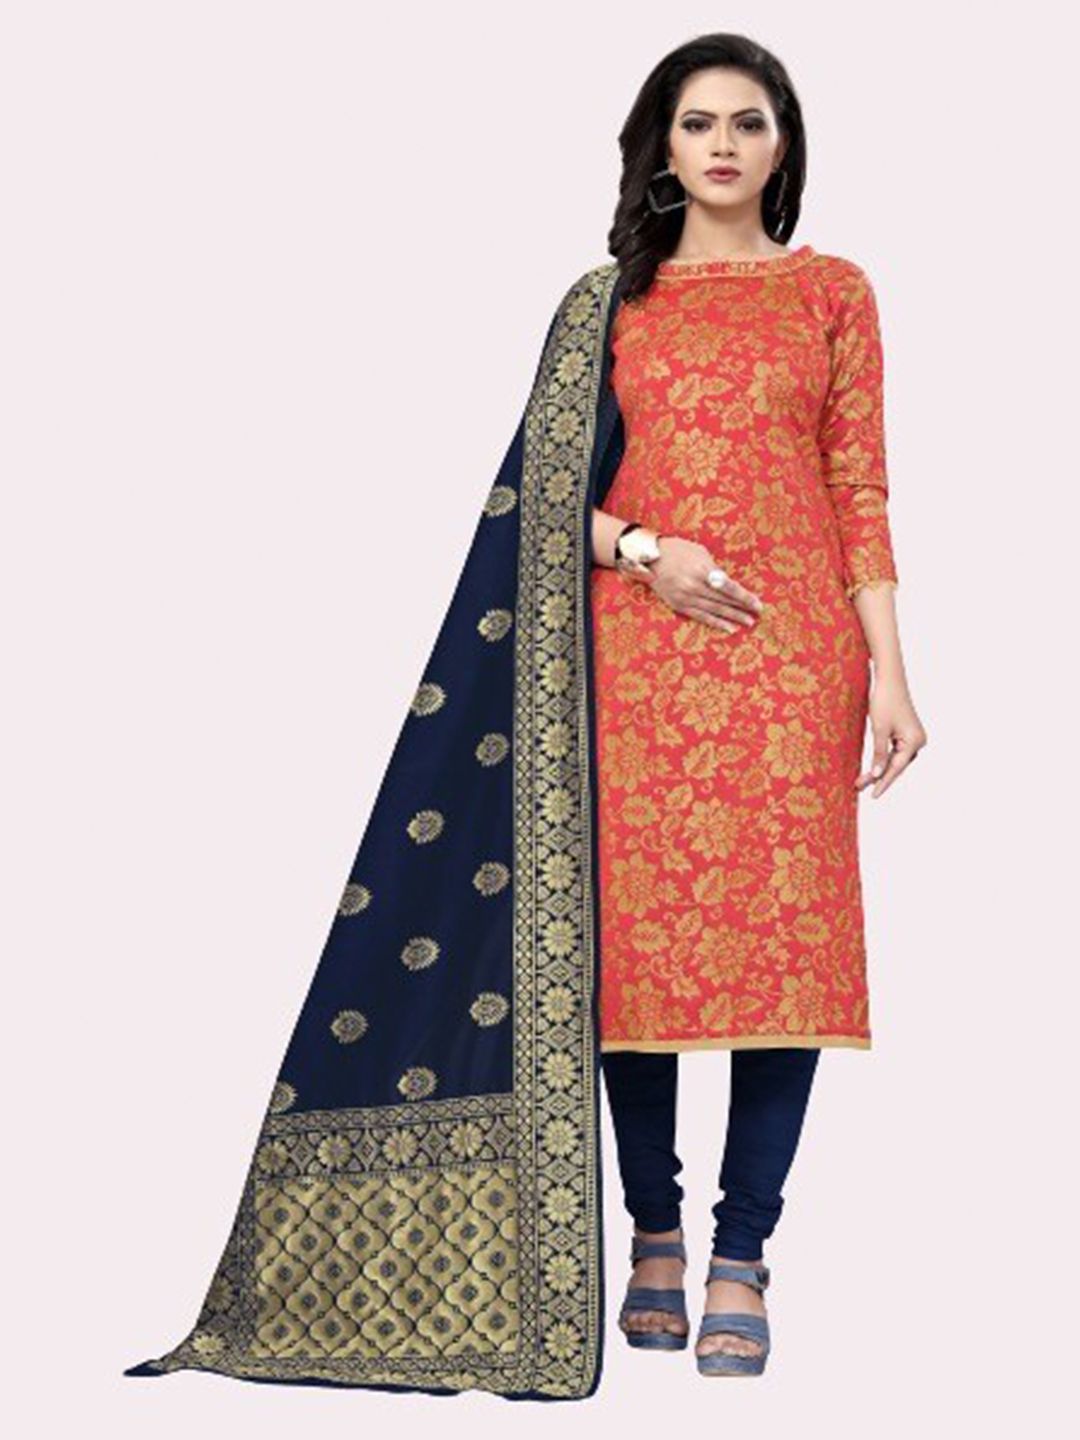 MORLY Women Peach & Navy Blue Dupion Silk Unstitched Dress Material Price in India